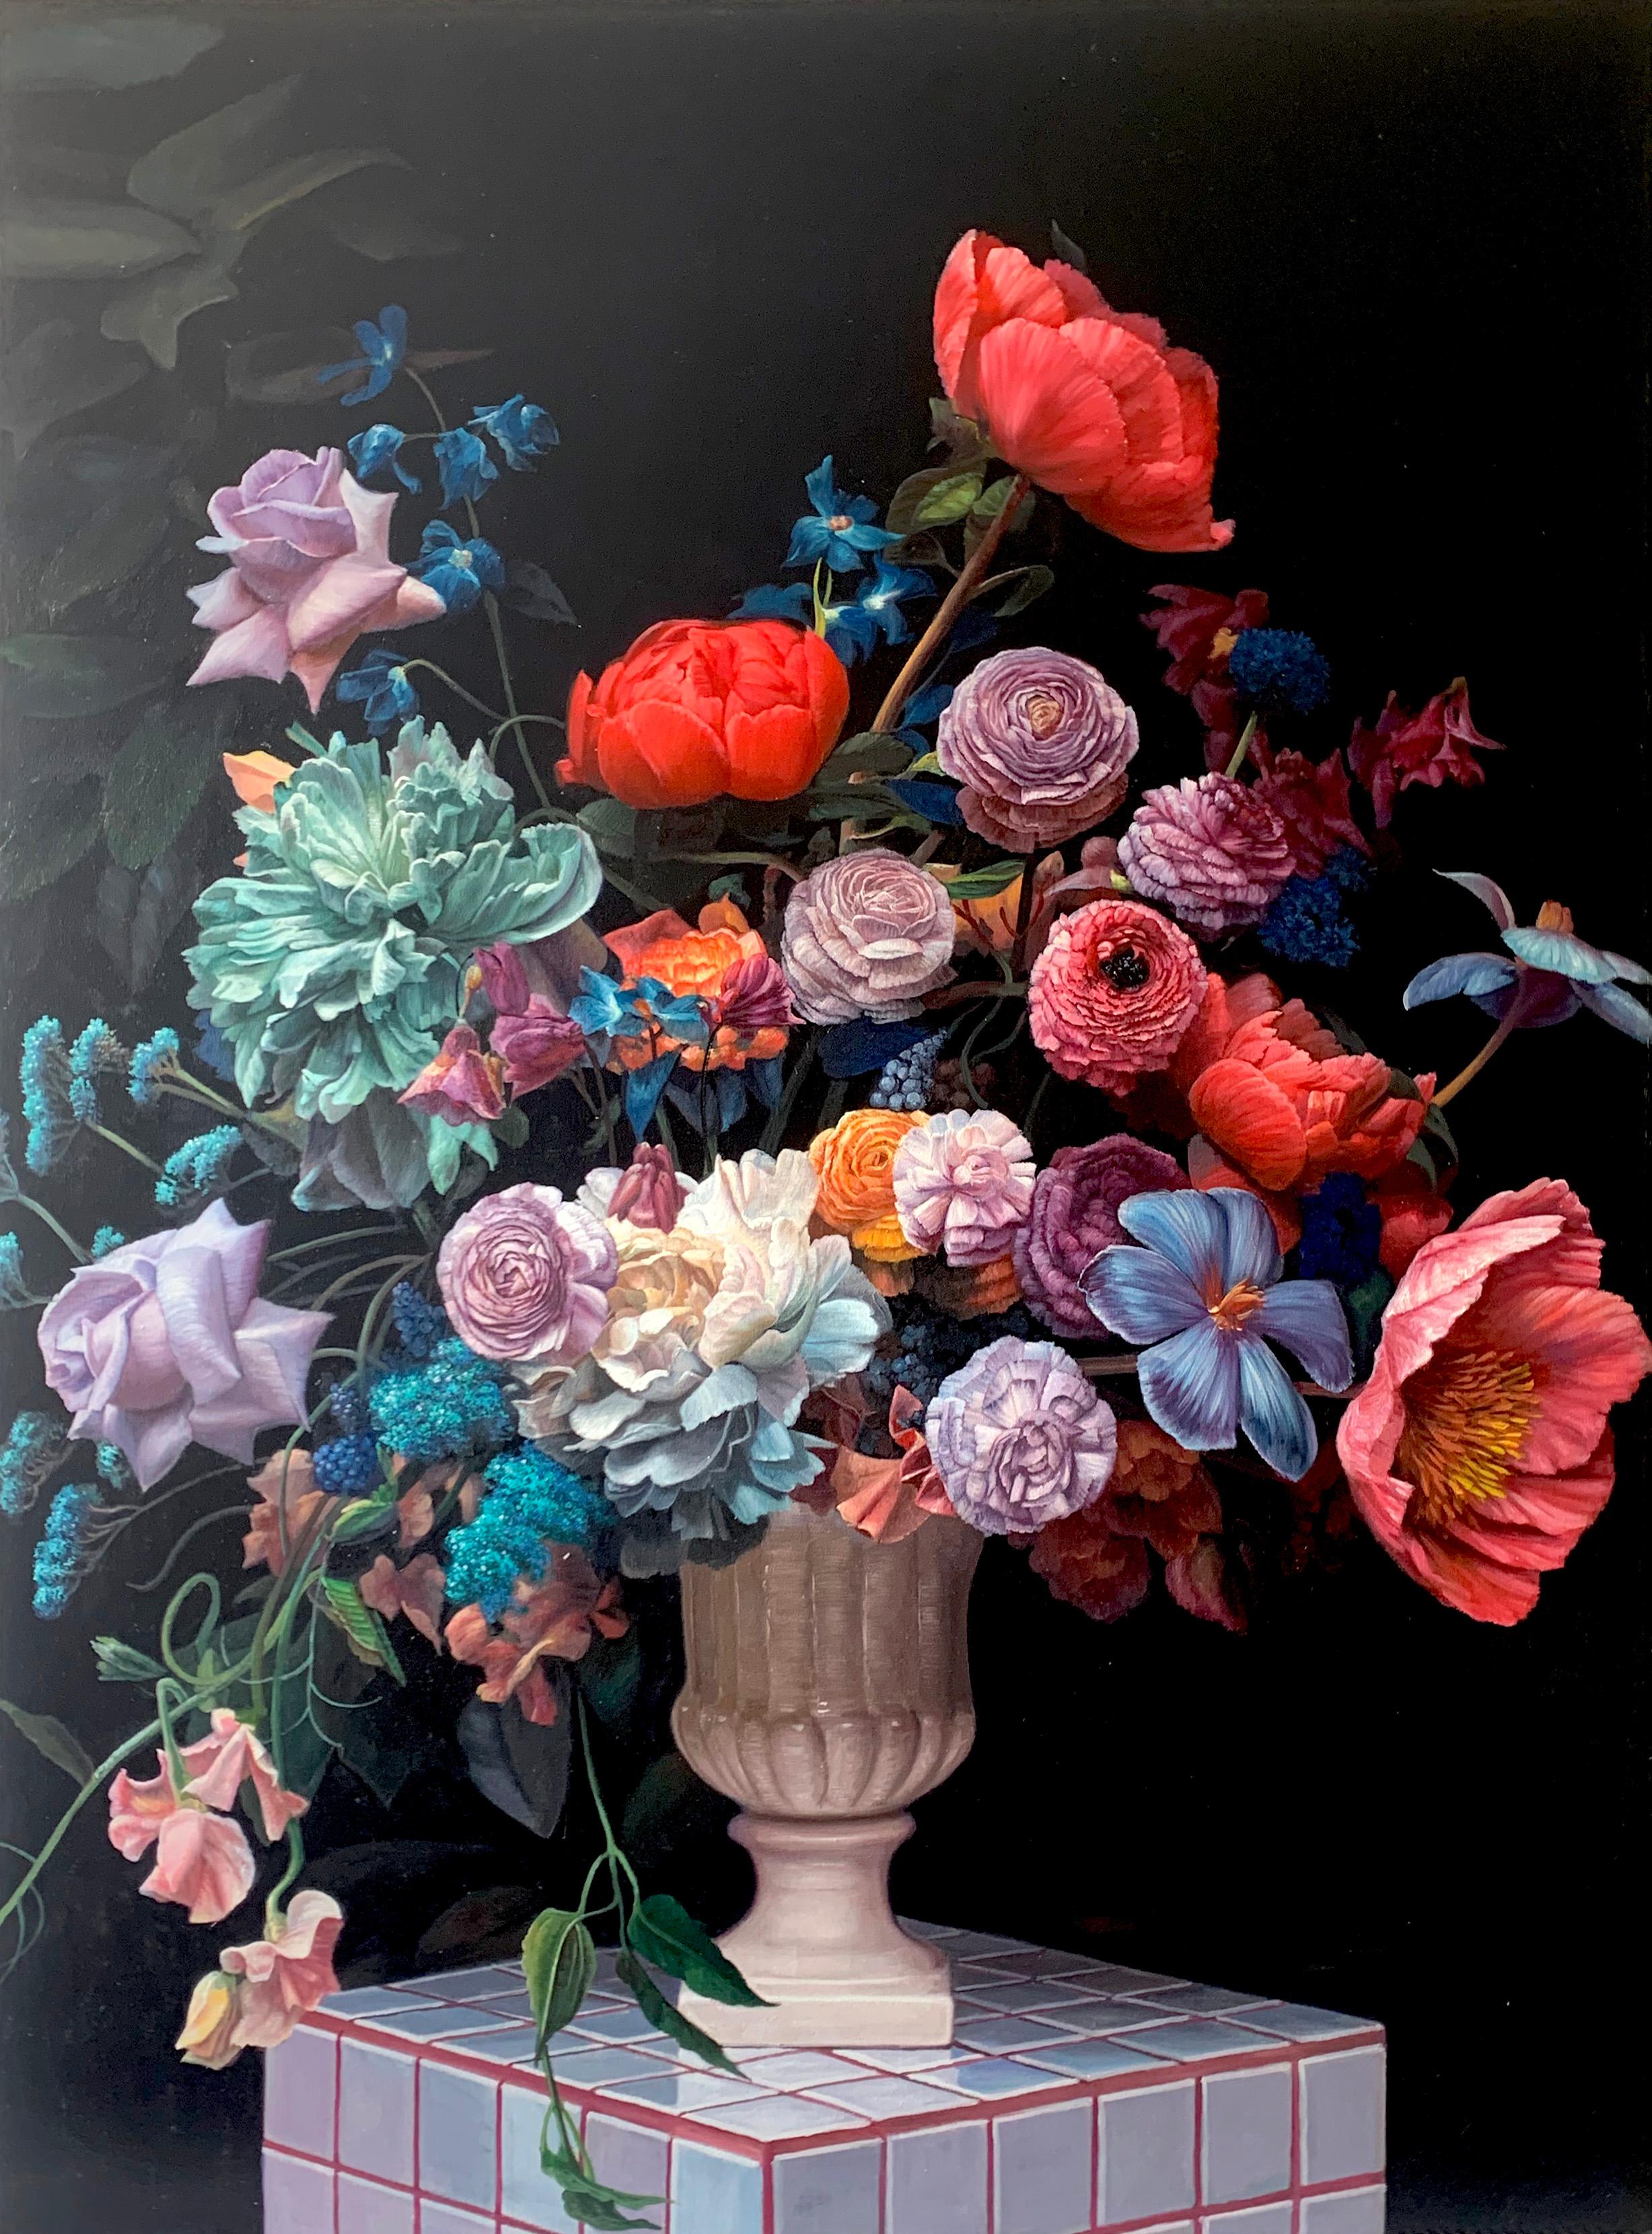 This is a beautiful oil painting of an array of flowers in a vase.
Contemporary painting full of details and colors, vibrant roses , tulips, peonies and an arrangement of other flowers. 
Reminding us of old master paintings, this is a brand new